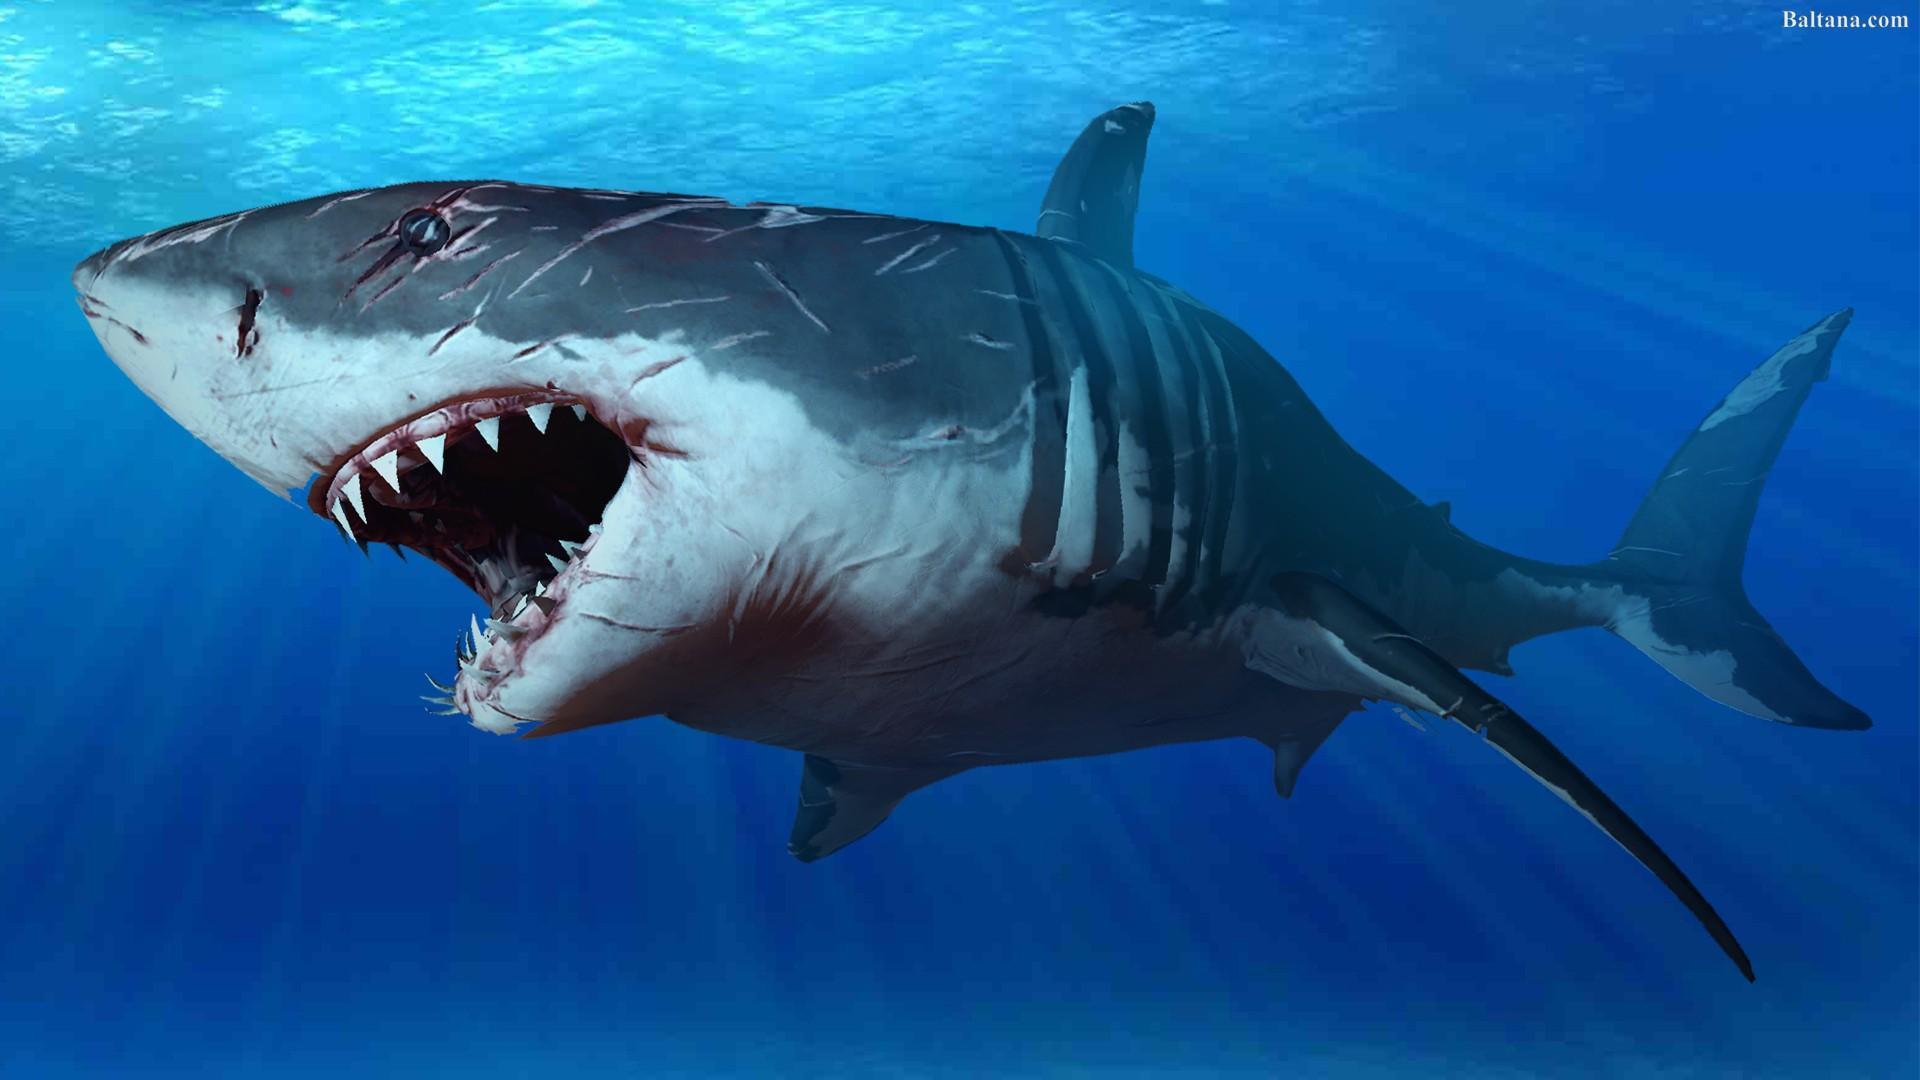 Sharks Wallpaper 2018 Pictures HD Images Free para Android - APK Descargar